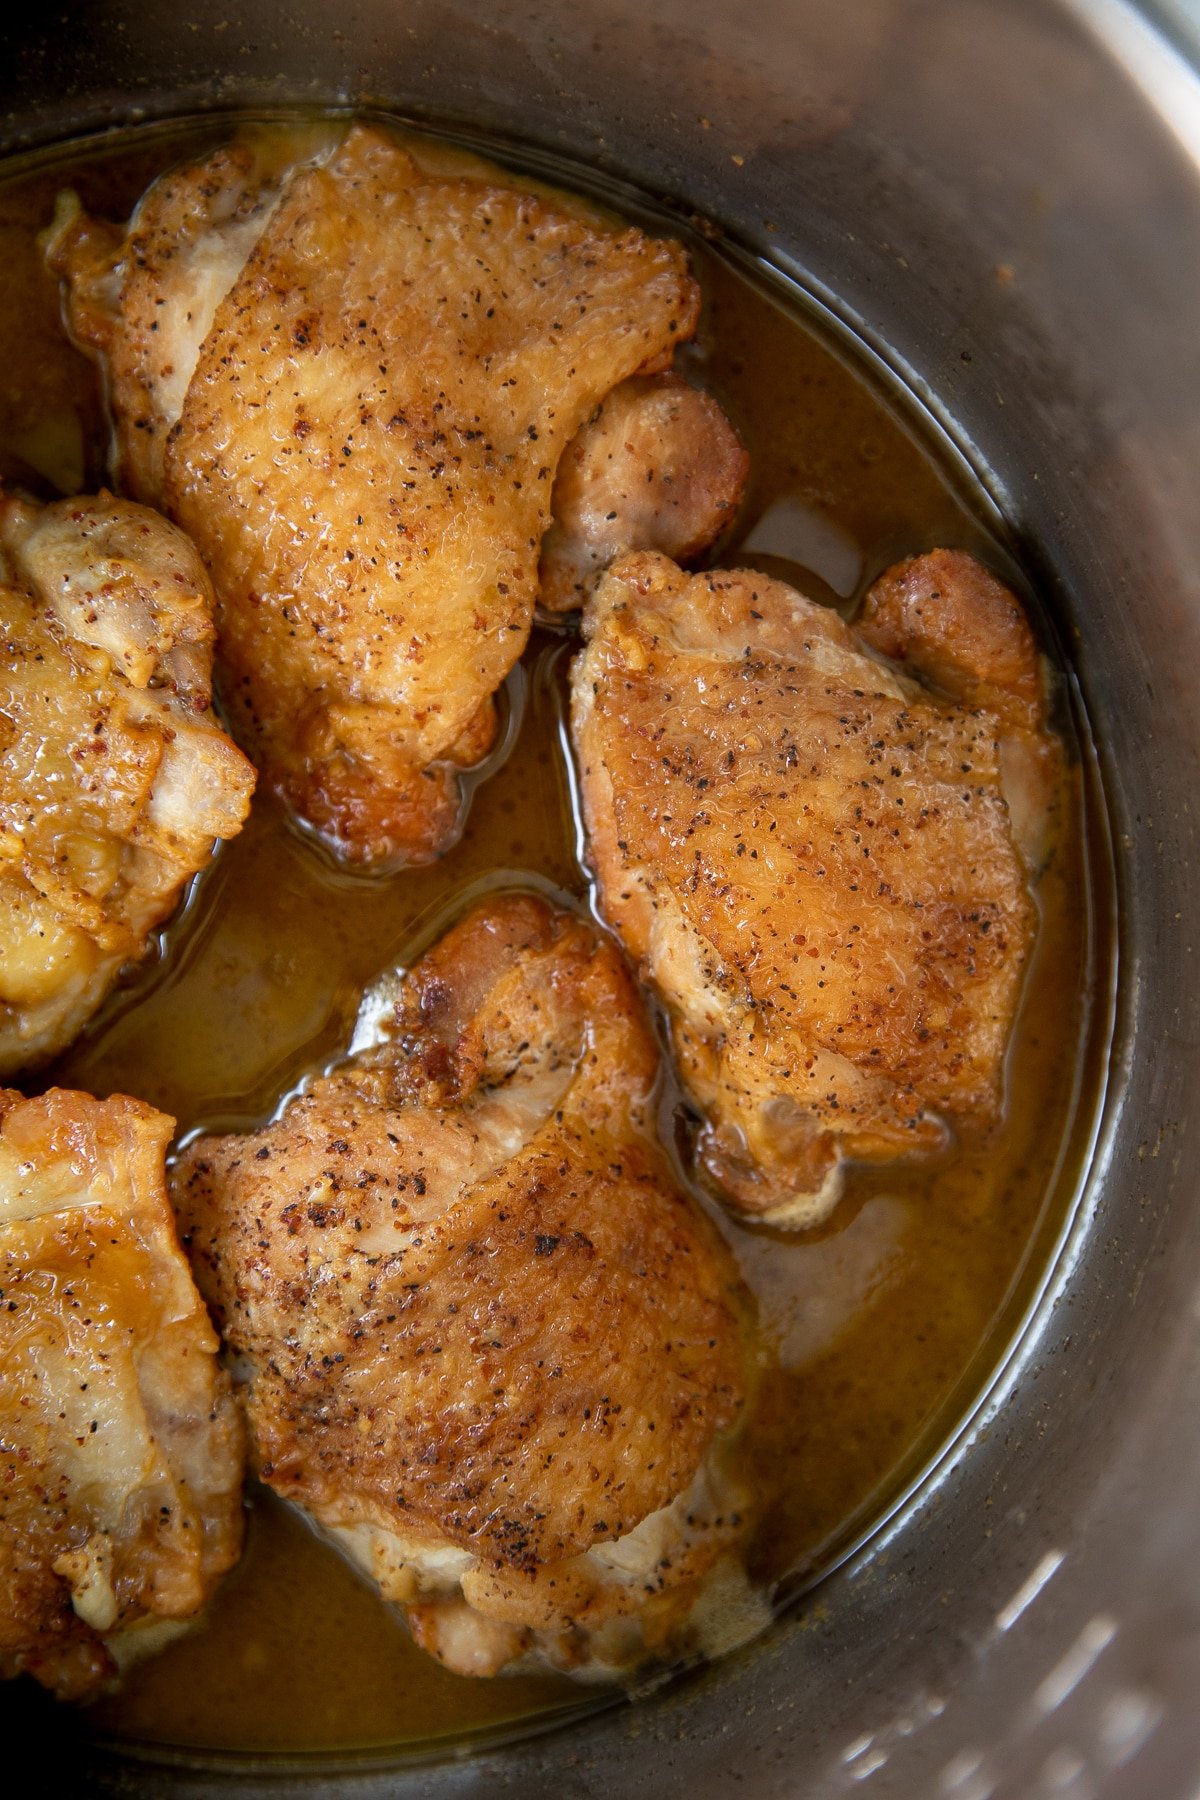 Five cooked chicken thighs in the bowl of a six quart Instant Pot resting in delicious honey mustard sauce.